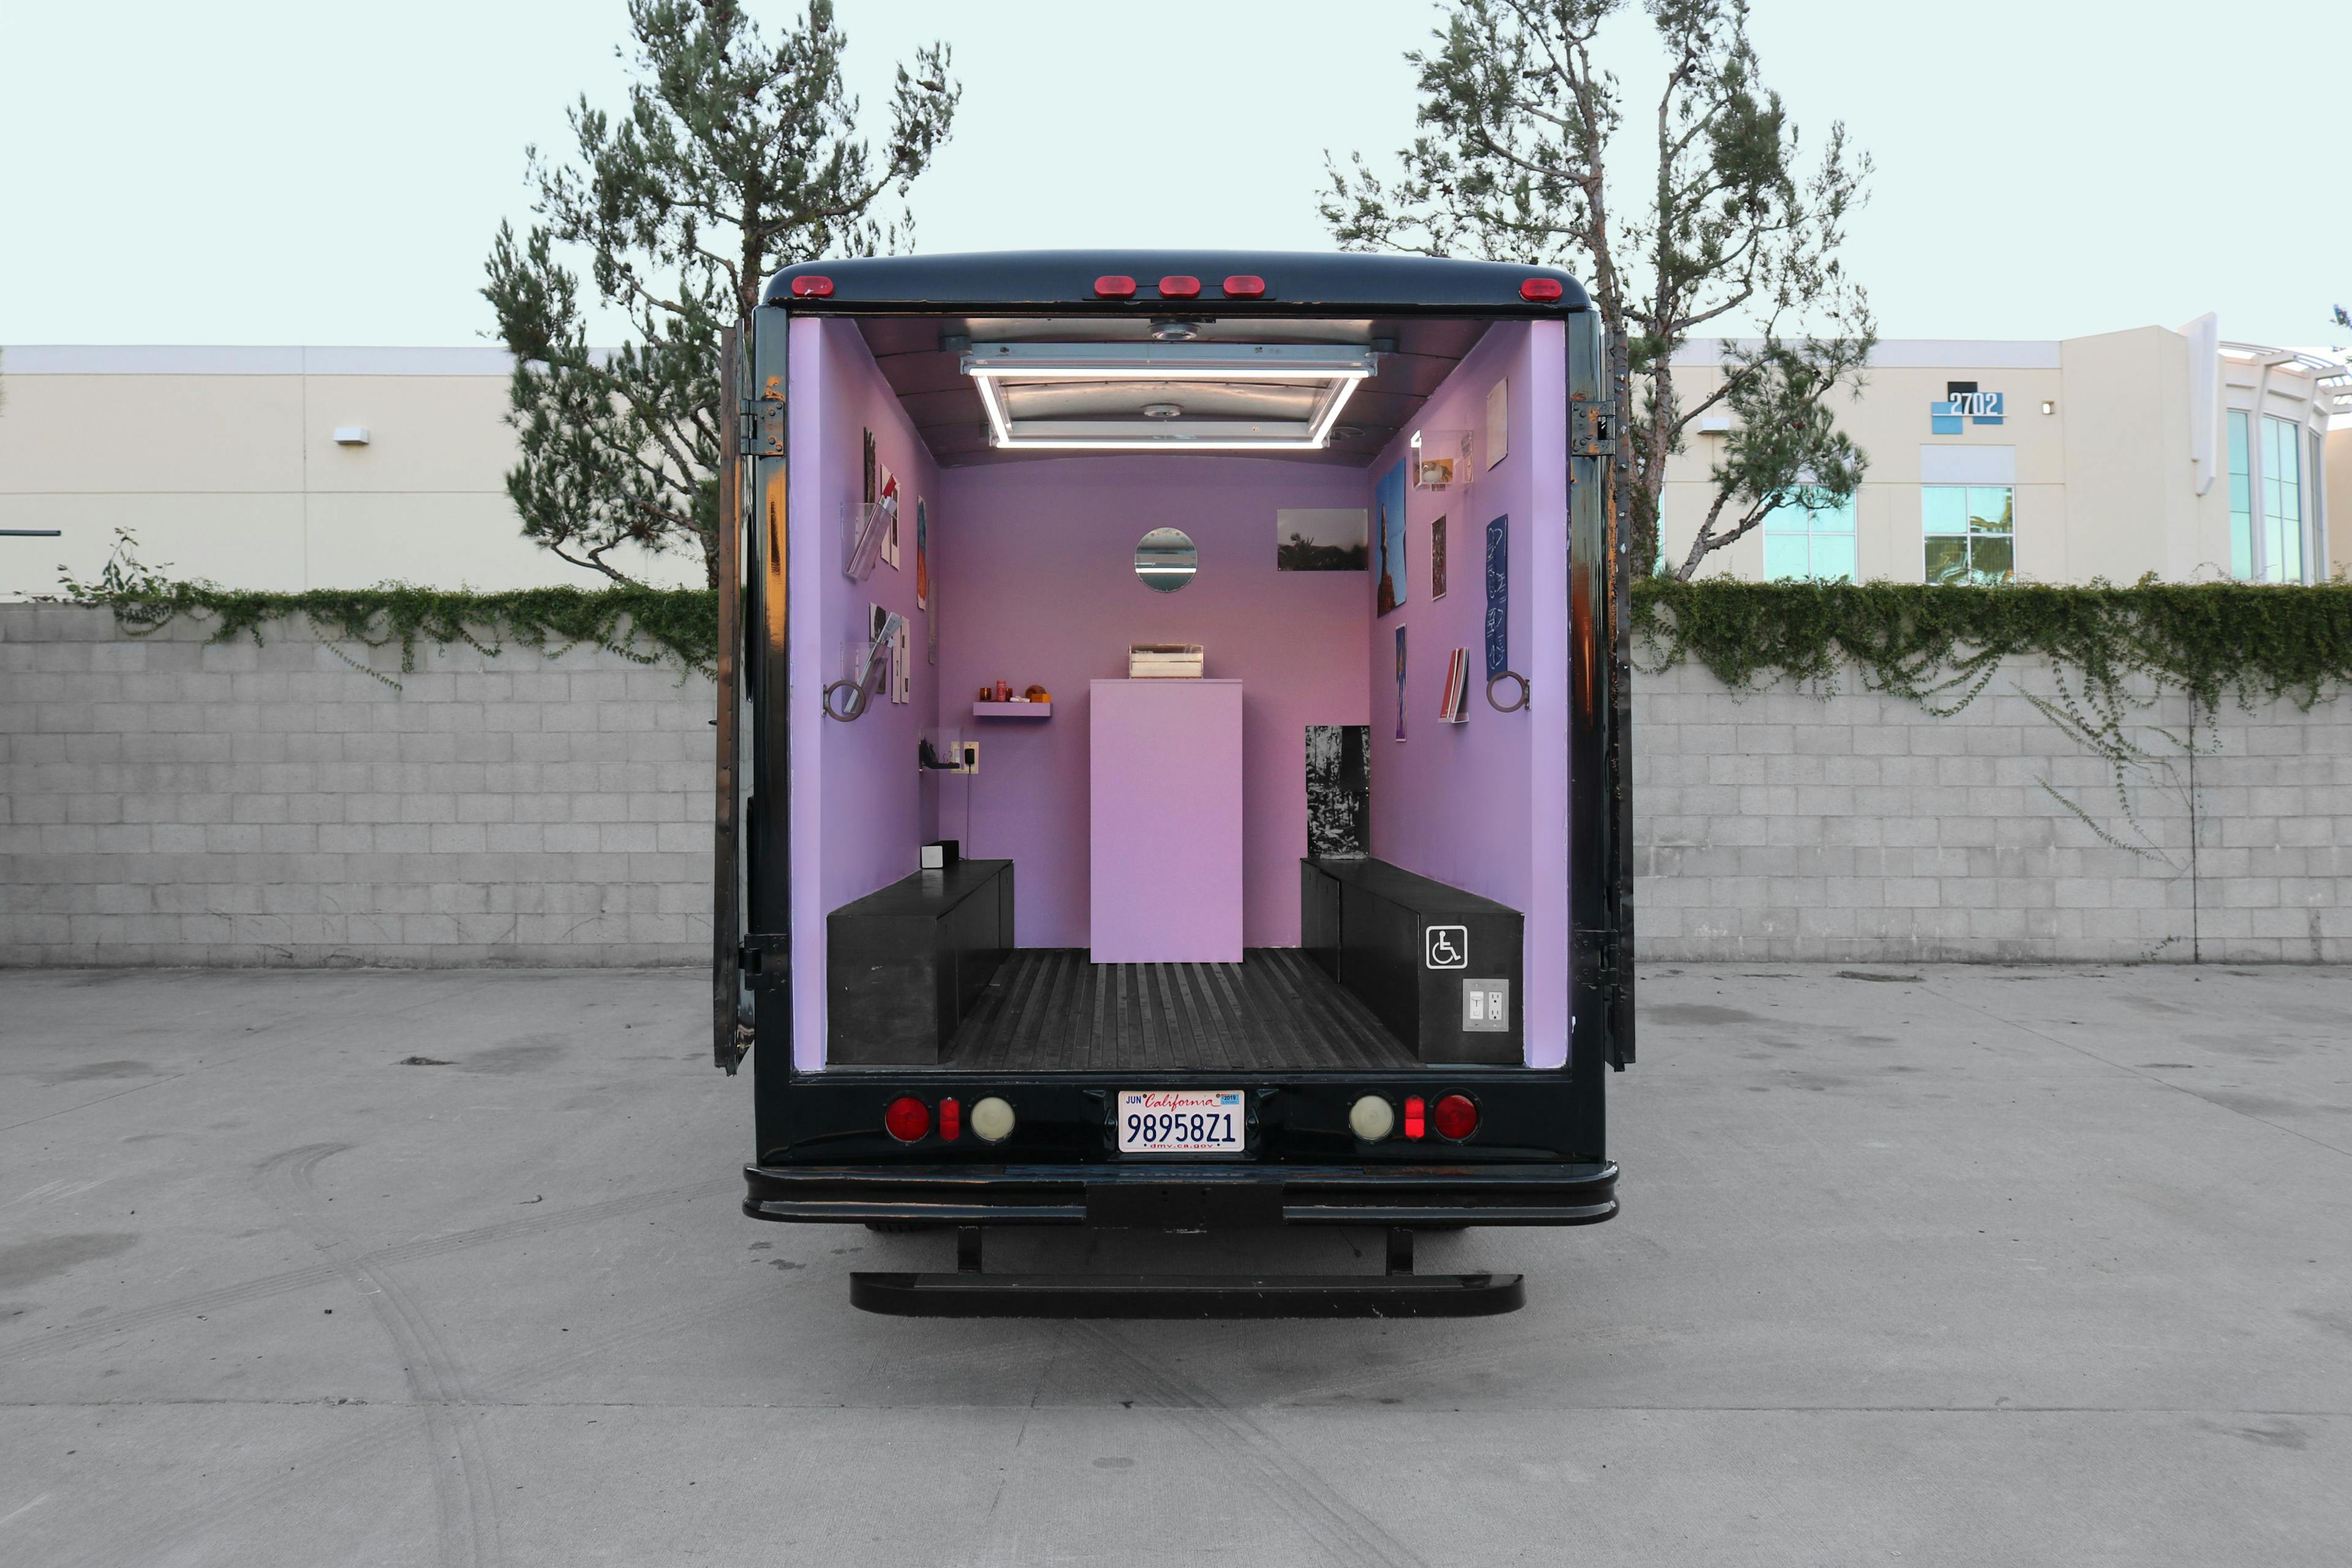 A small box truck sits parked in an outdoor lot, next to a cinderblock wall and two small trees. The truck's door has been rolled up, revealing a bright lavender interior filled with various small artworks on the walls and on a pedestal inside.